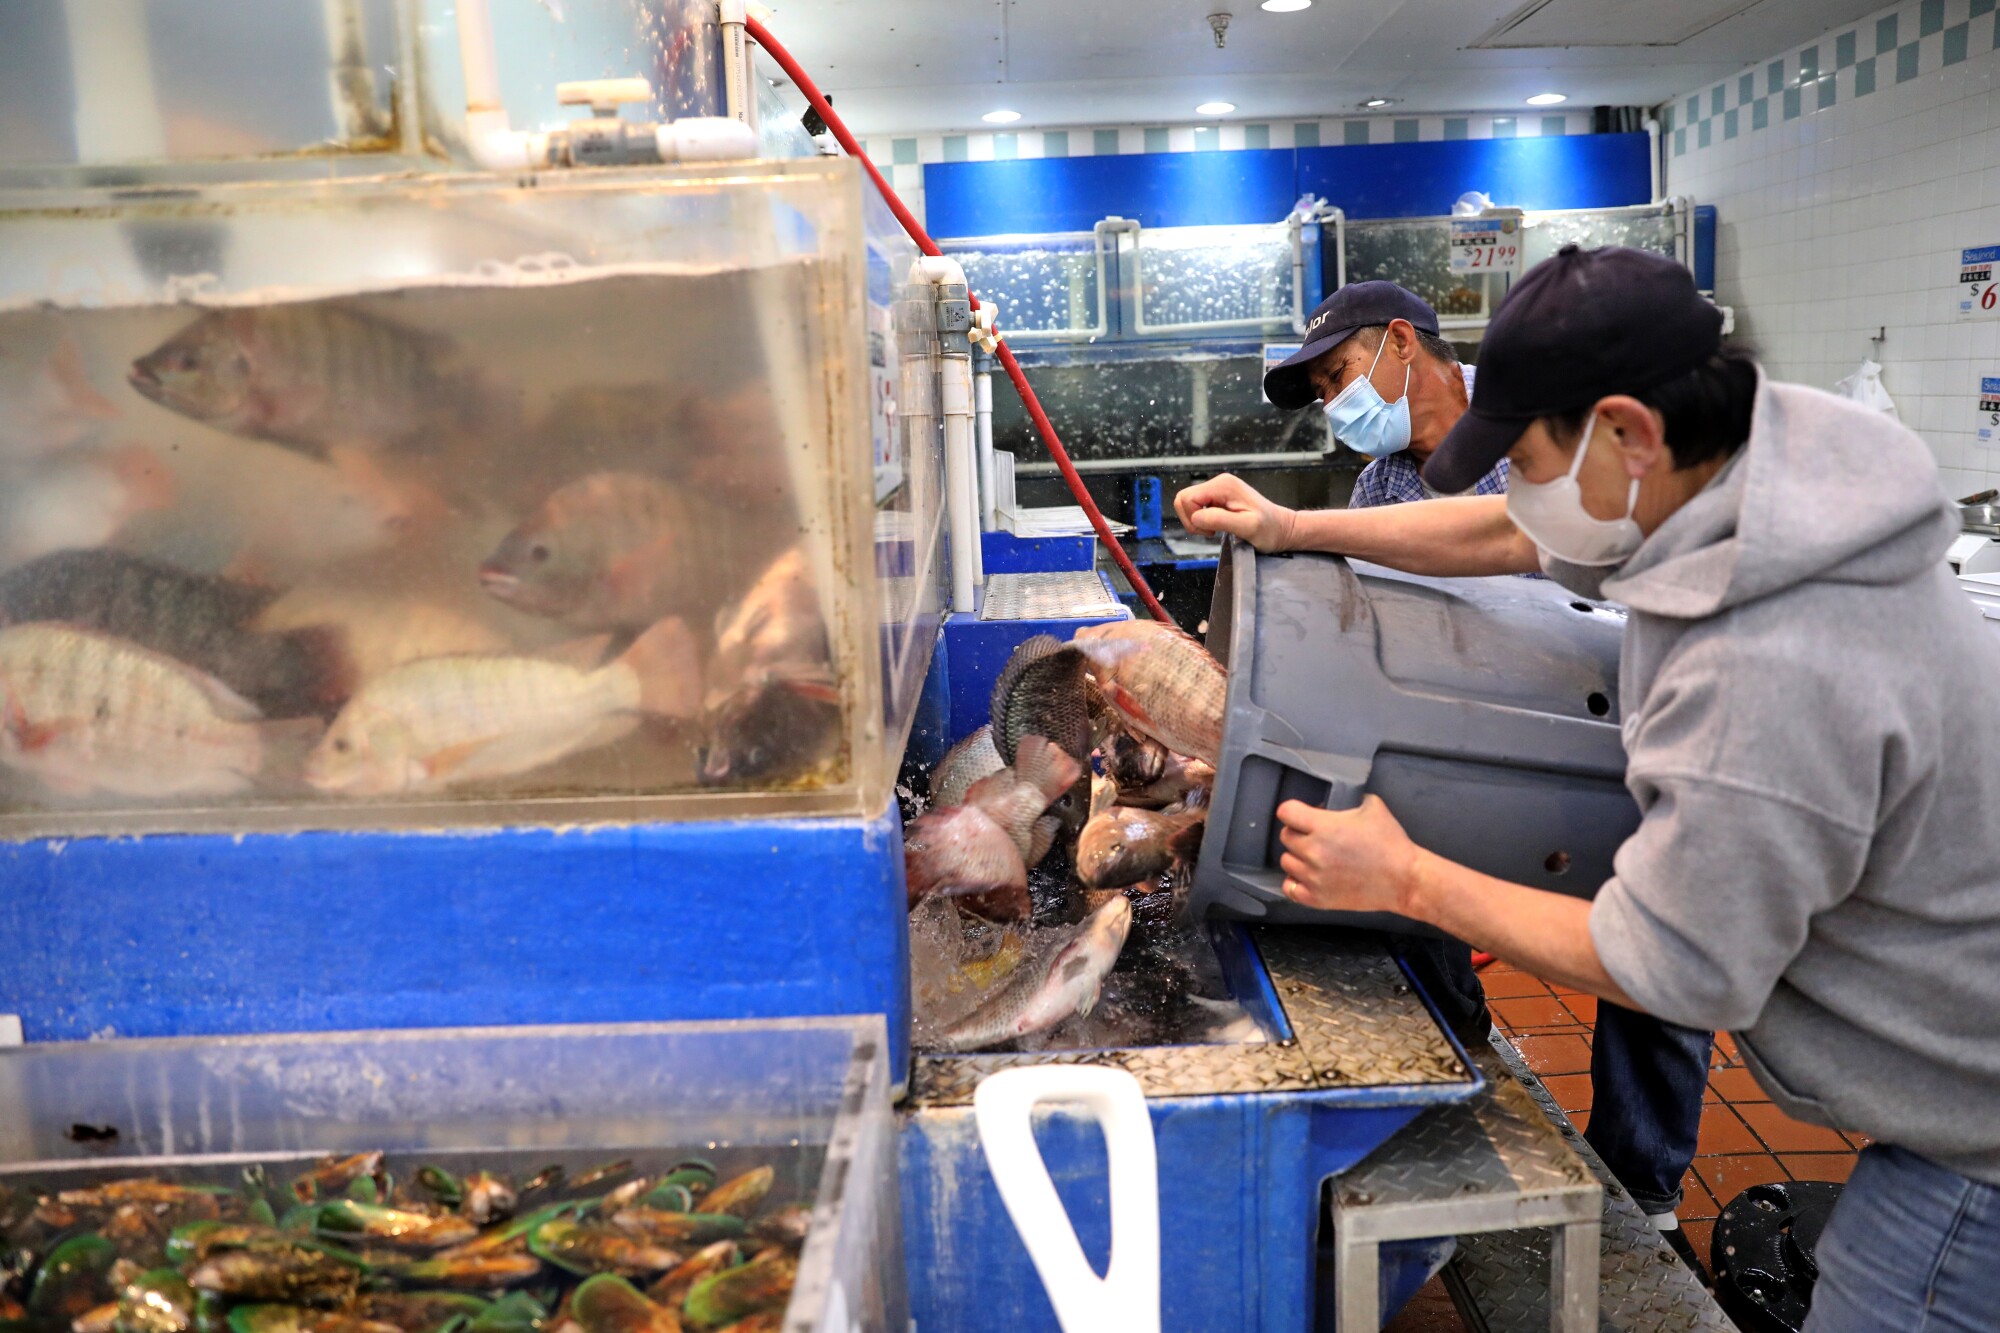 Workers pour live tilapia into aeration tanks for customers to purchase at Great Wall Supermarket in Monterey Park.